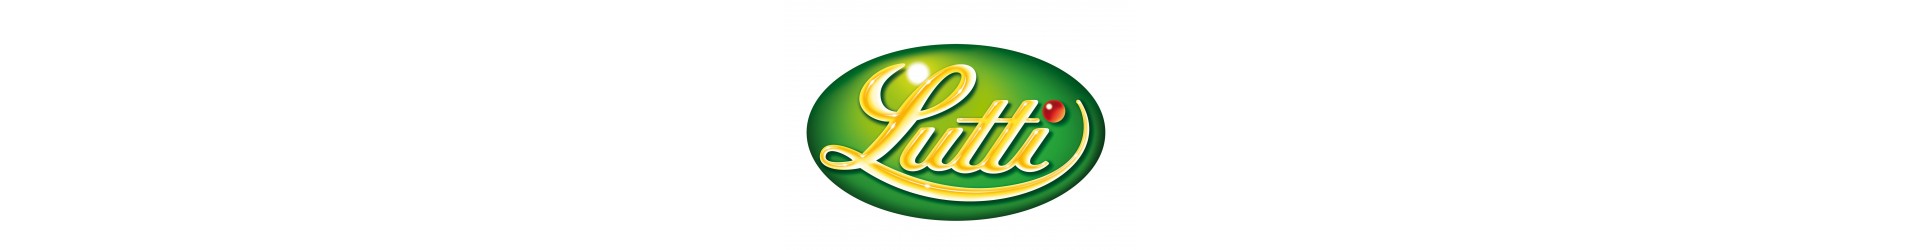 Lutti Goodies for Children | Lutti Personalized 7 Families Game